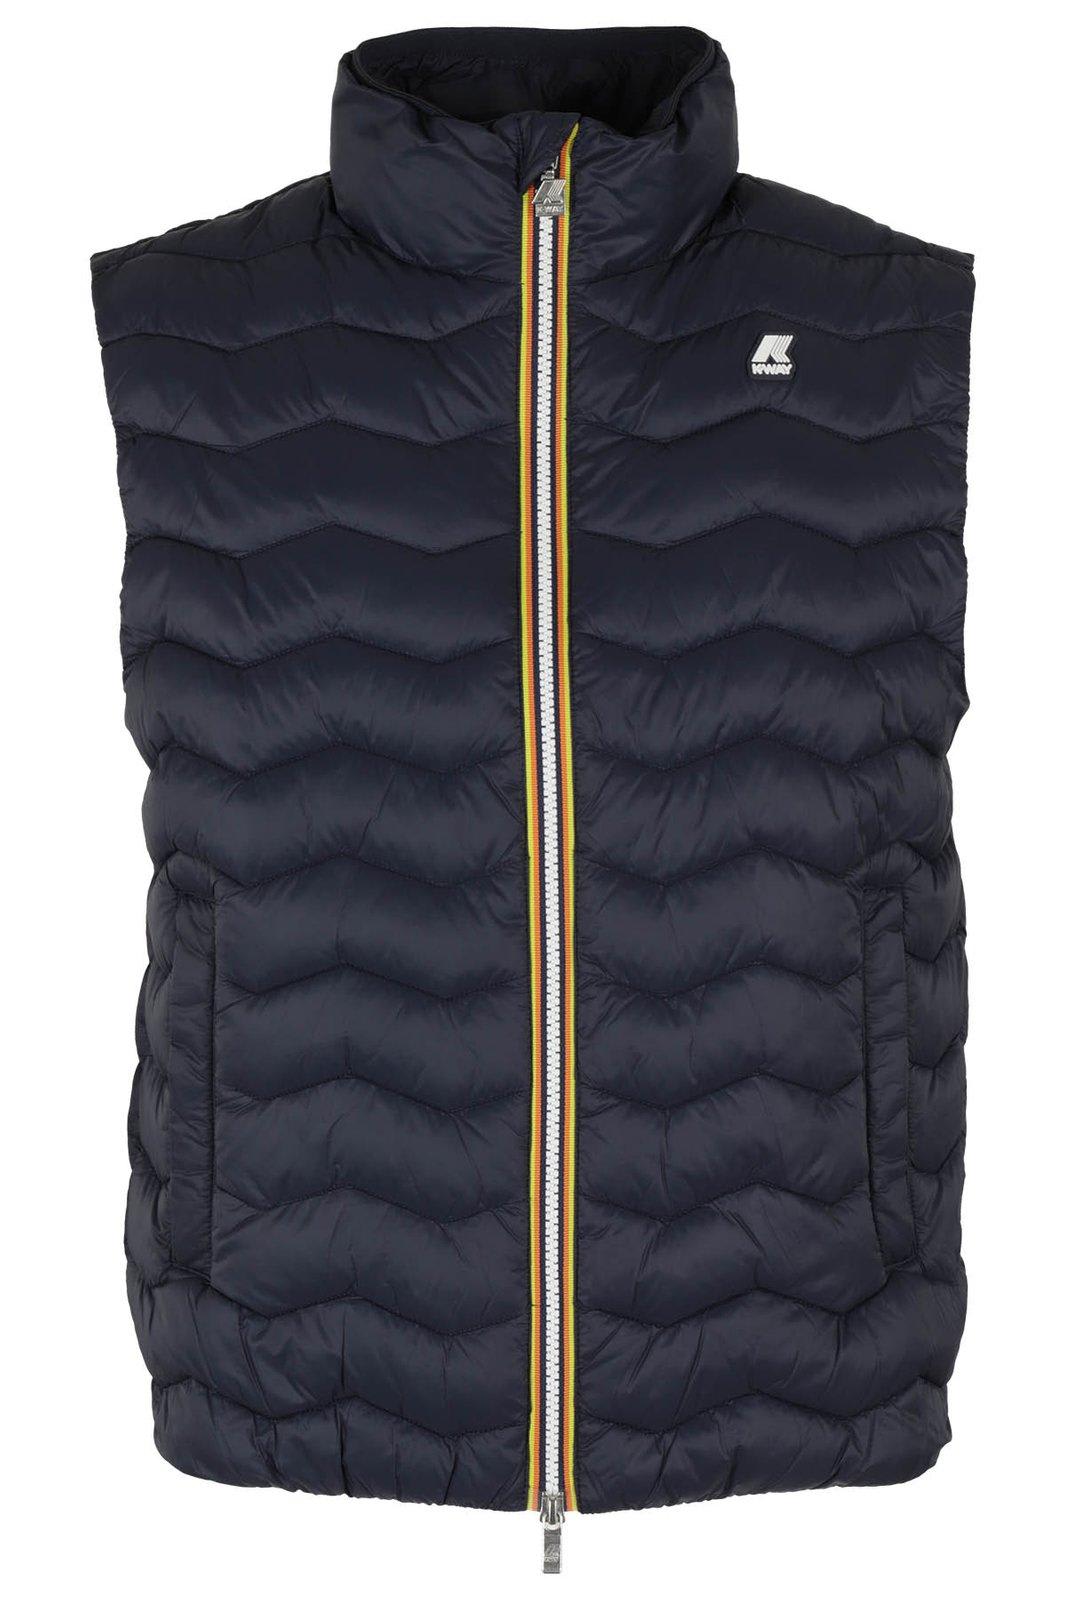 Valen Quilted Warm Zipped Gilet K-Way